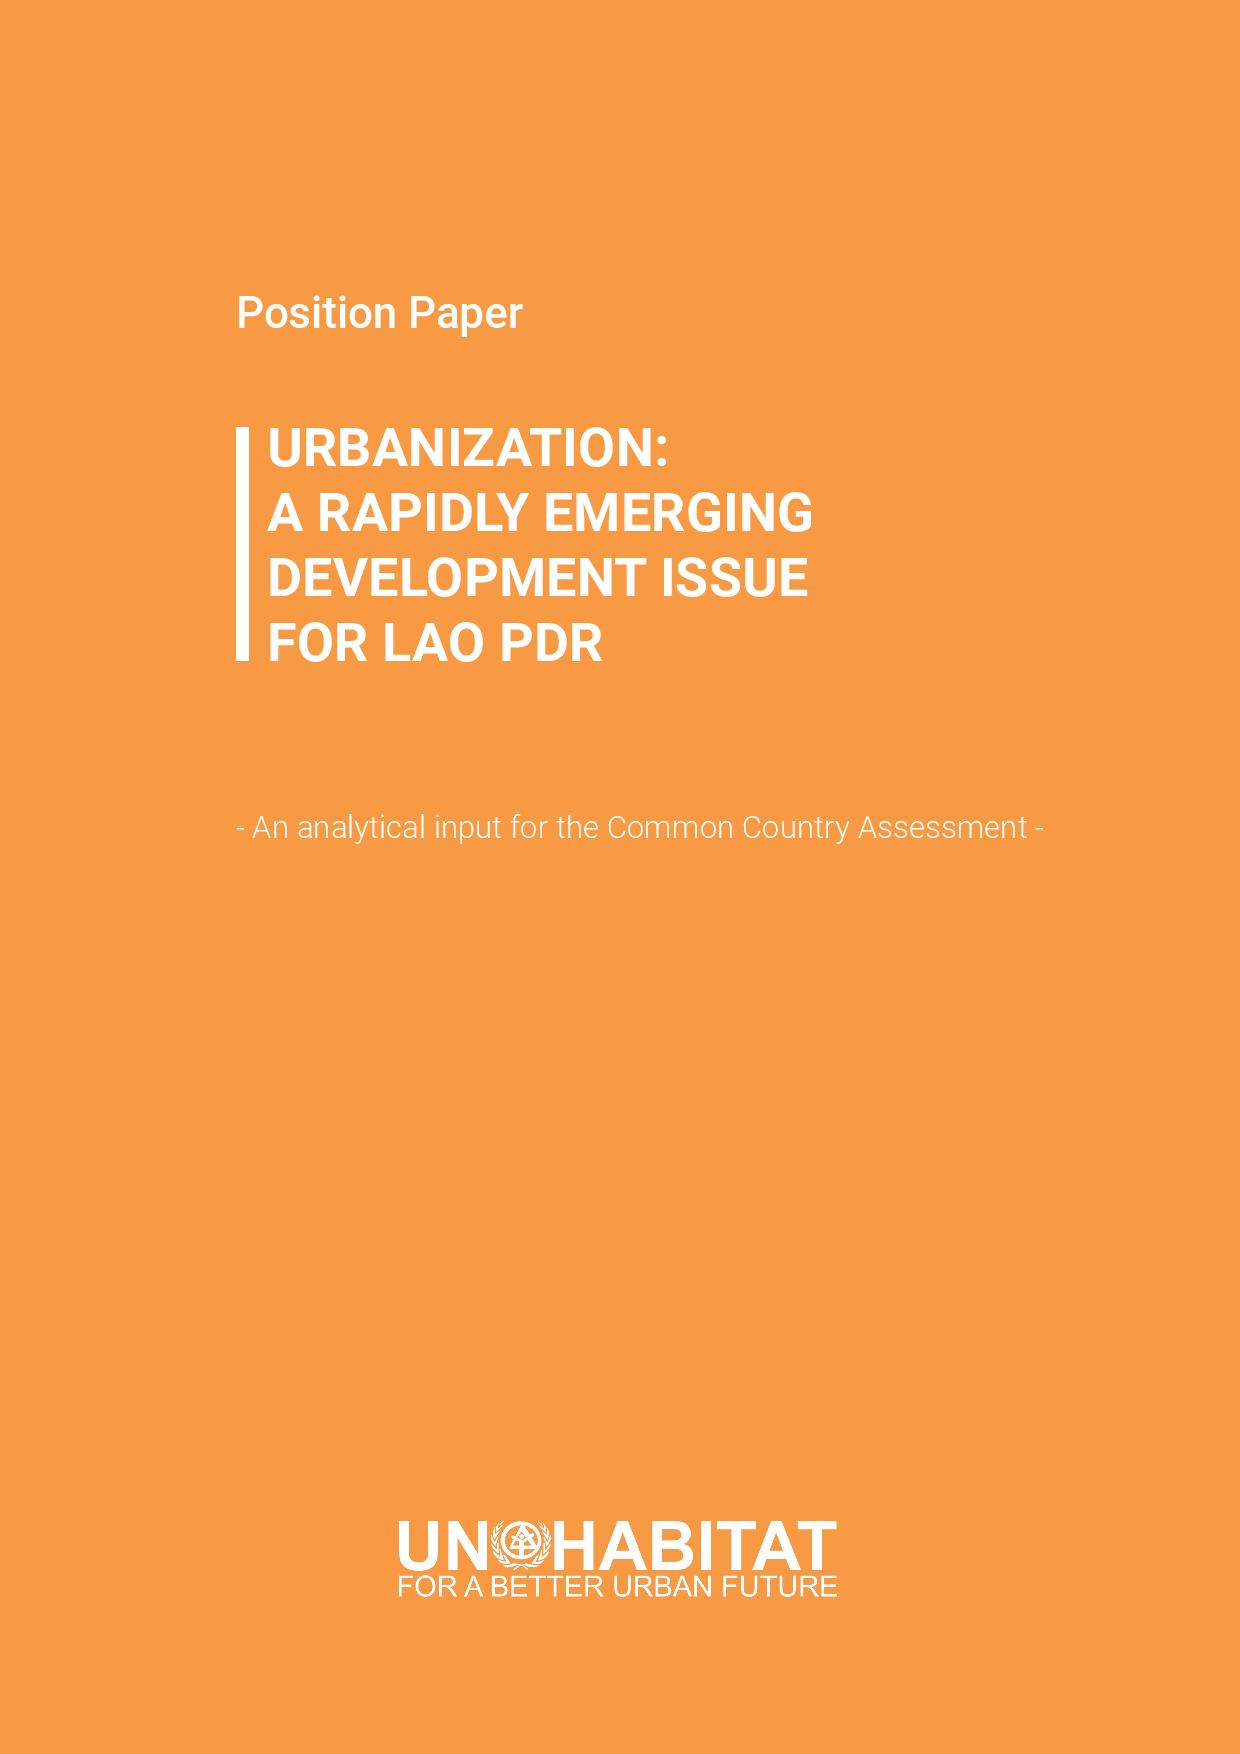 Urbanization: A Rapidly Emerging Development Issue for Lao PDR